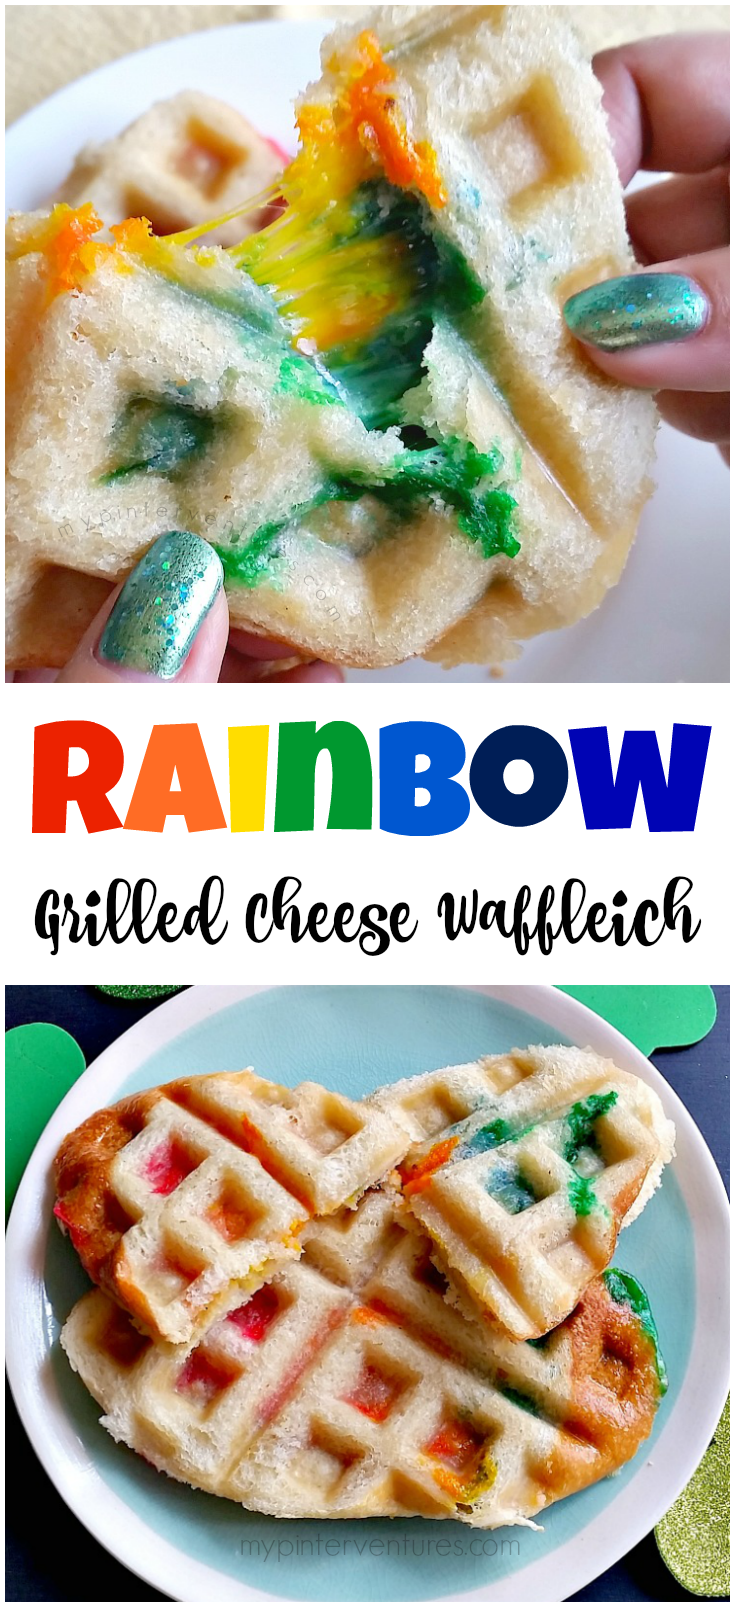 Rainbow Grilled Cheese Waffleich - made with colored cheese and pressed in a waffle maker